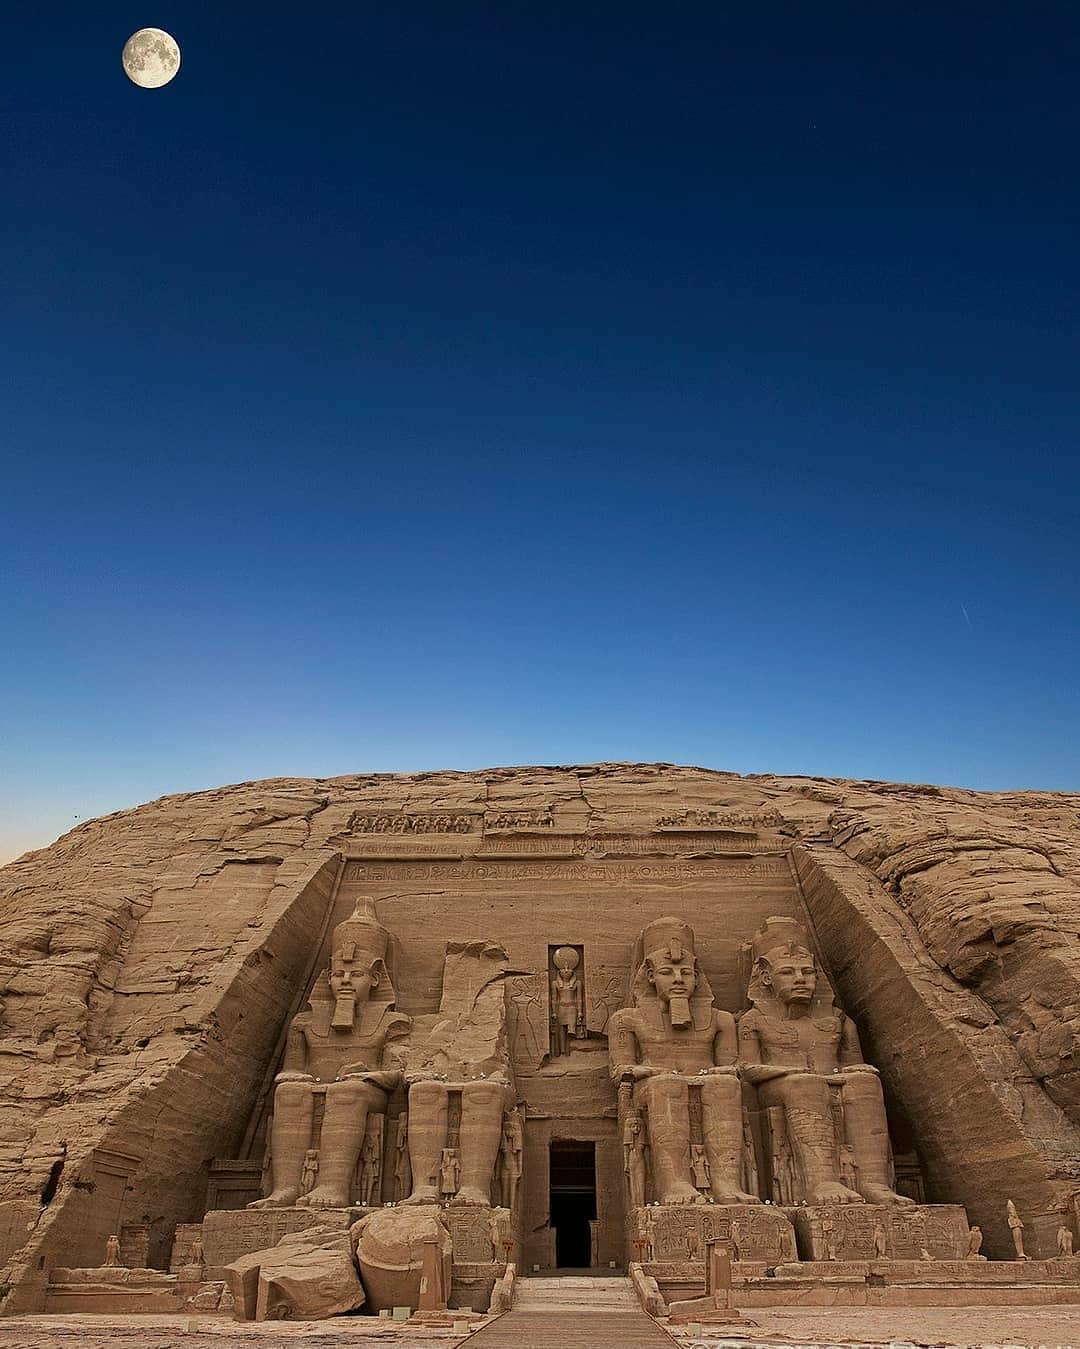 The Great Temple of Ramesses II a massive rock-cut temple at Abu Simble(Arabic: أبو سمبل‎), a village in Aswan Governate, Upper Egypt 1264 BC